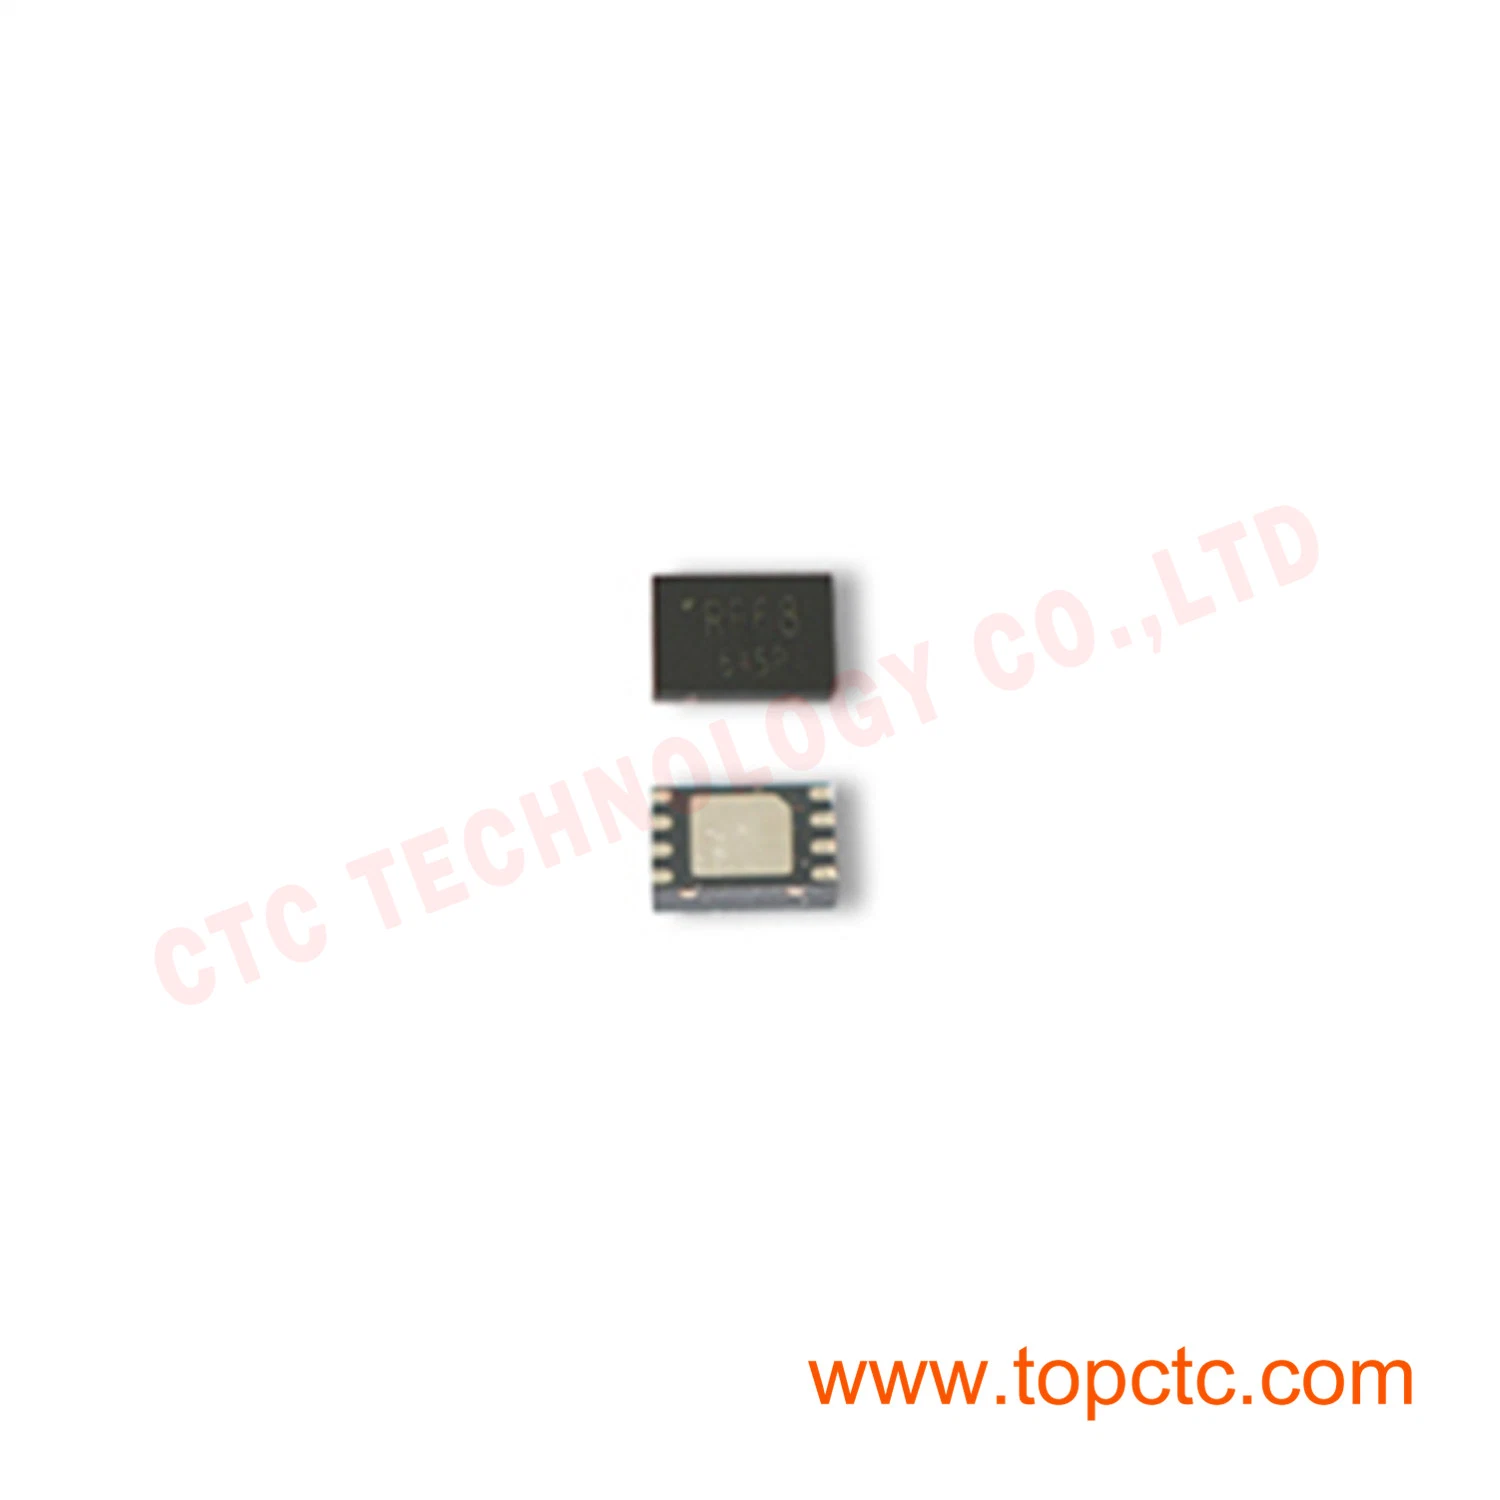 Consumer Electronic components Sub-GHz RF transmitter IC RF68W